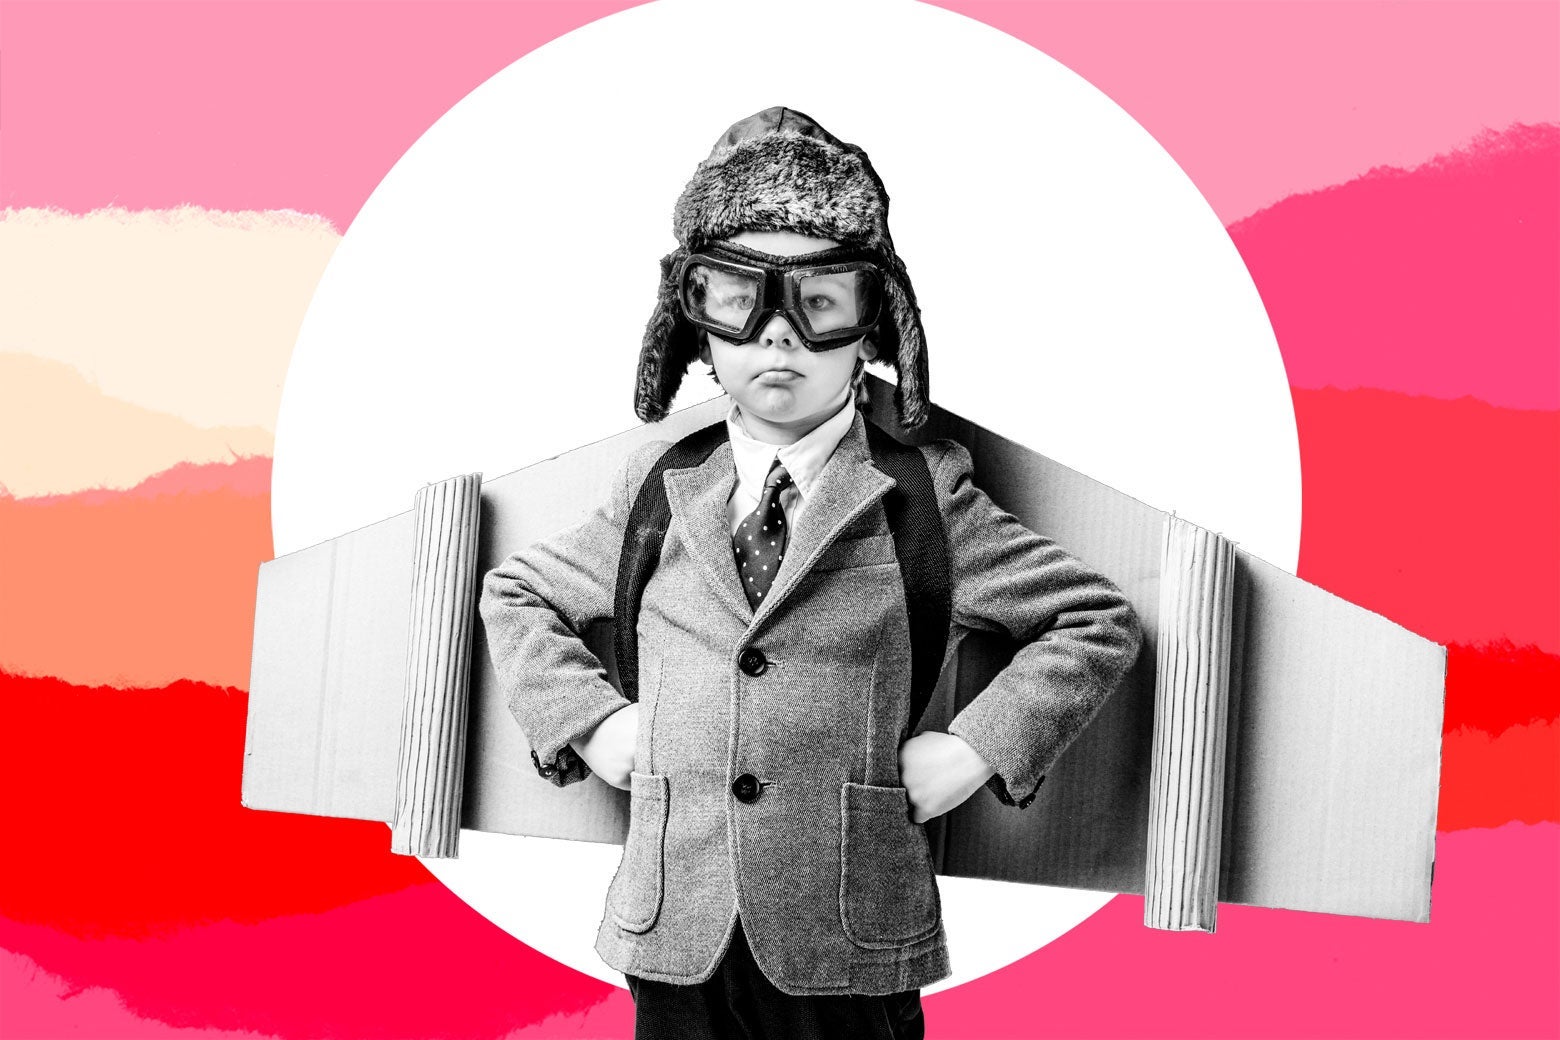 Photo illustration of a young boy wearing cardboard wings and pilot goggles.